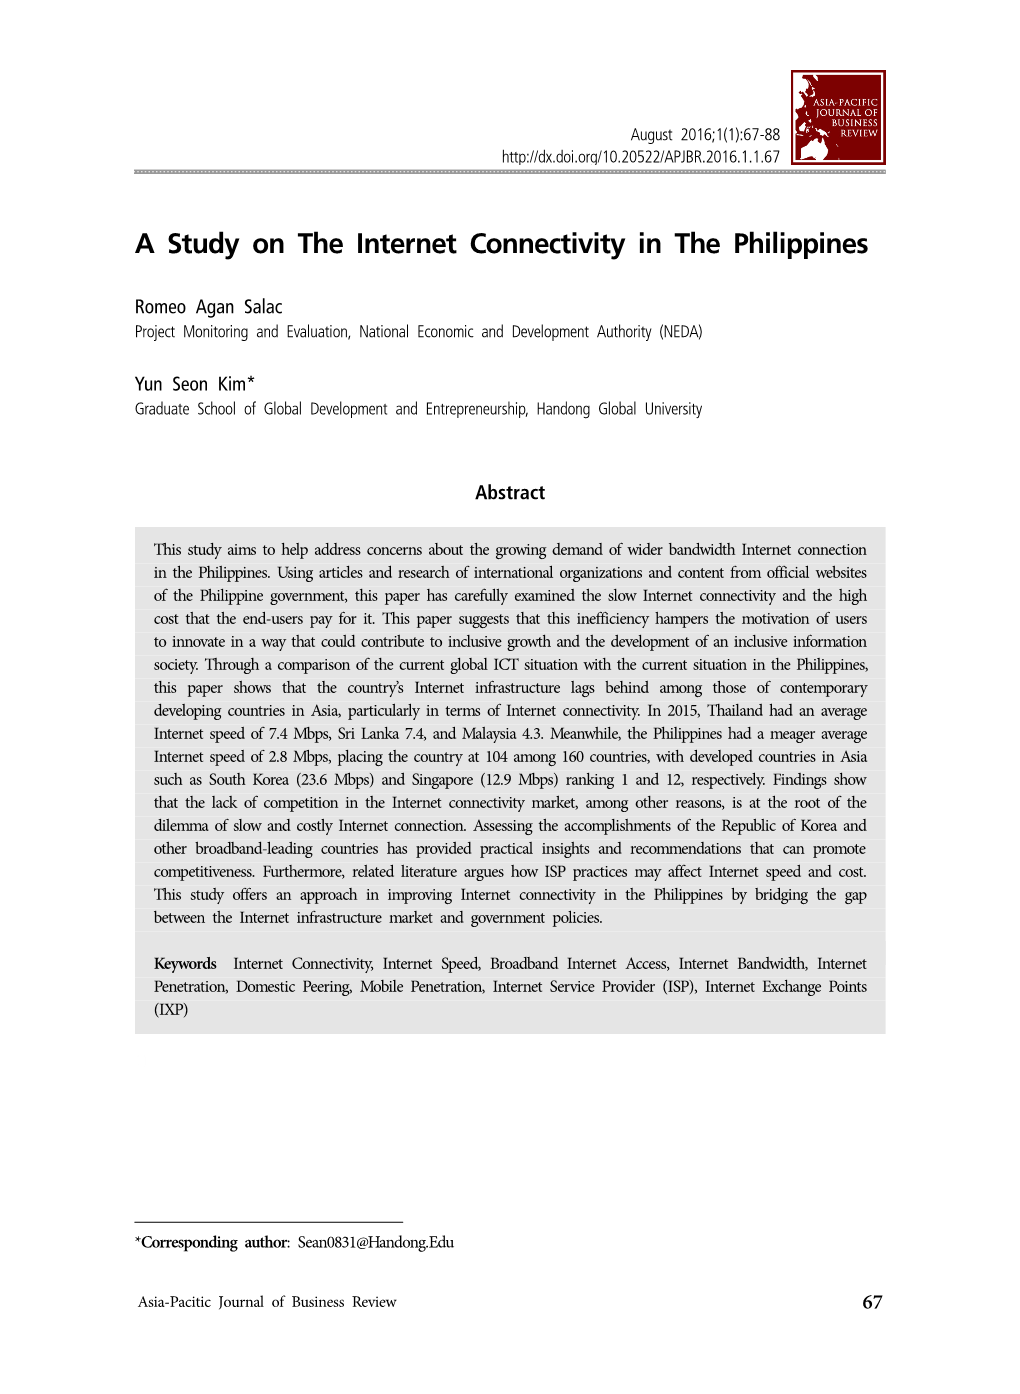 A Study on the Internet Connectivity in the Philippines